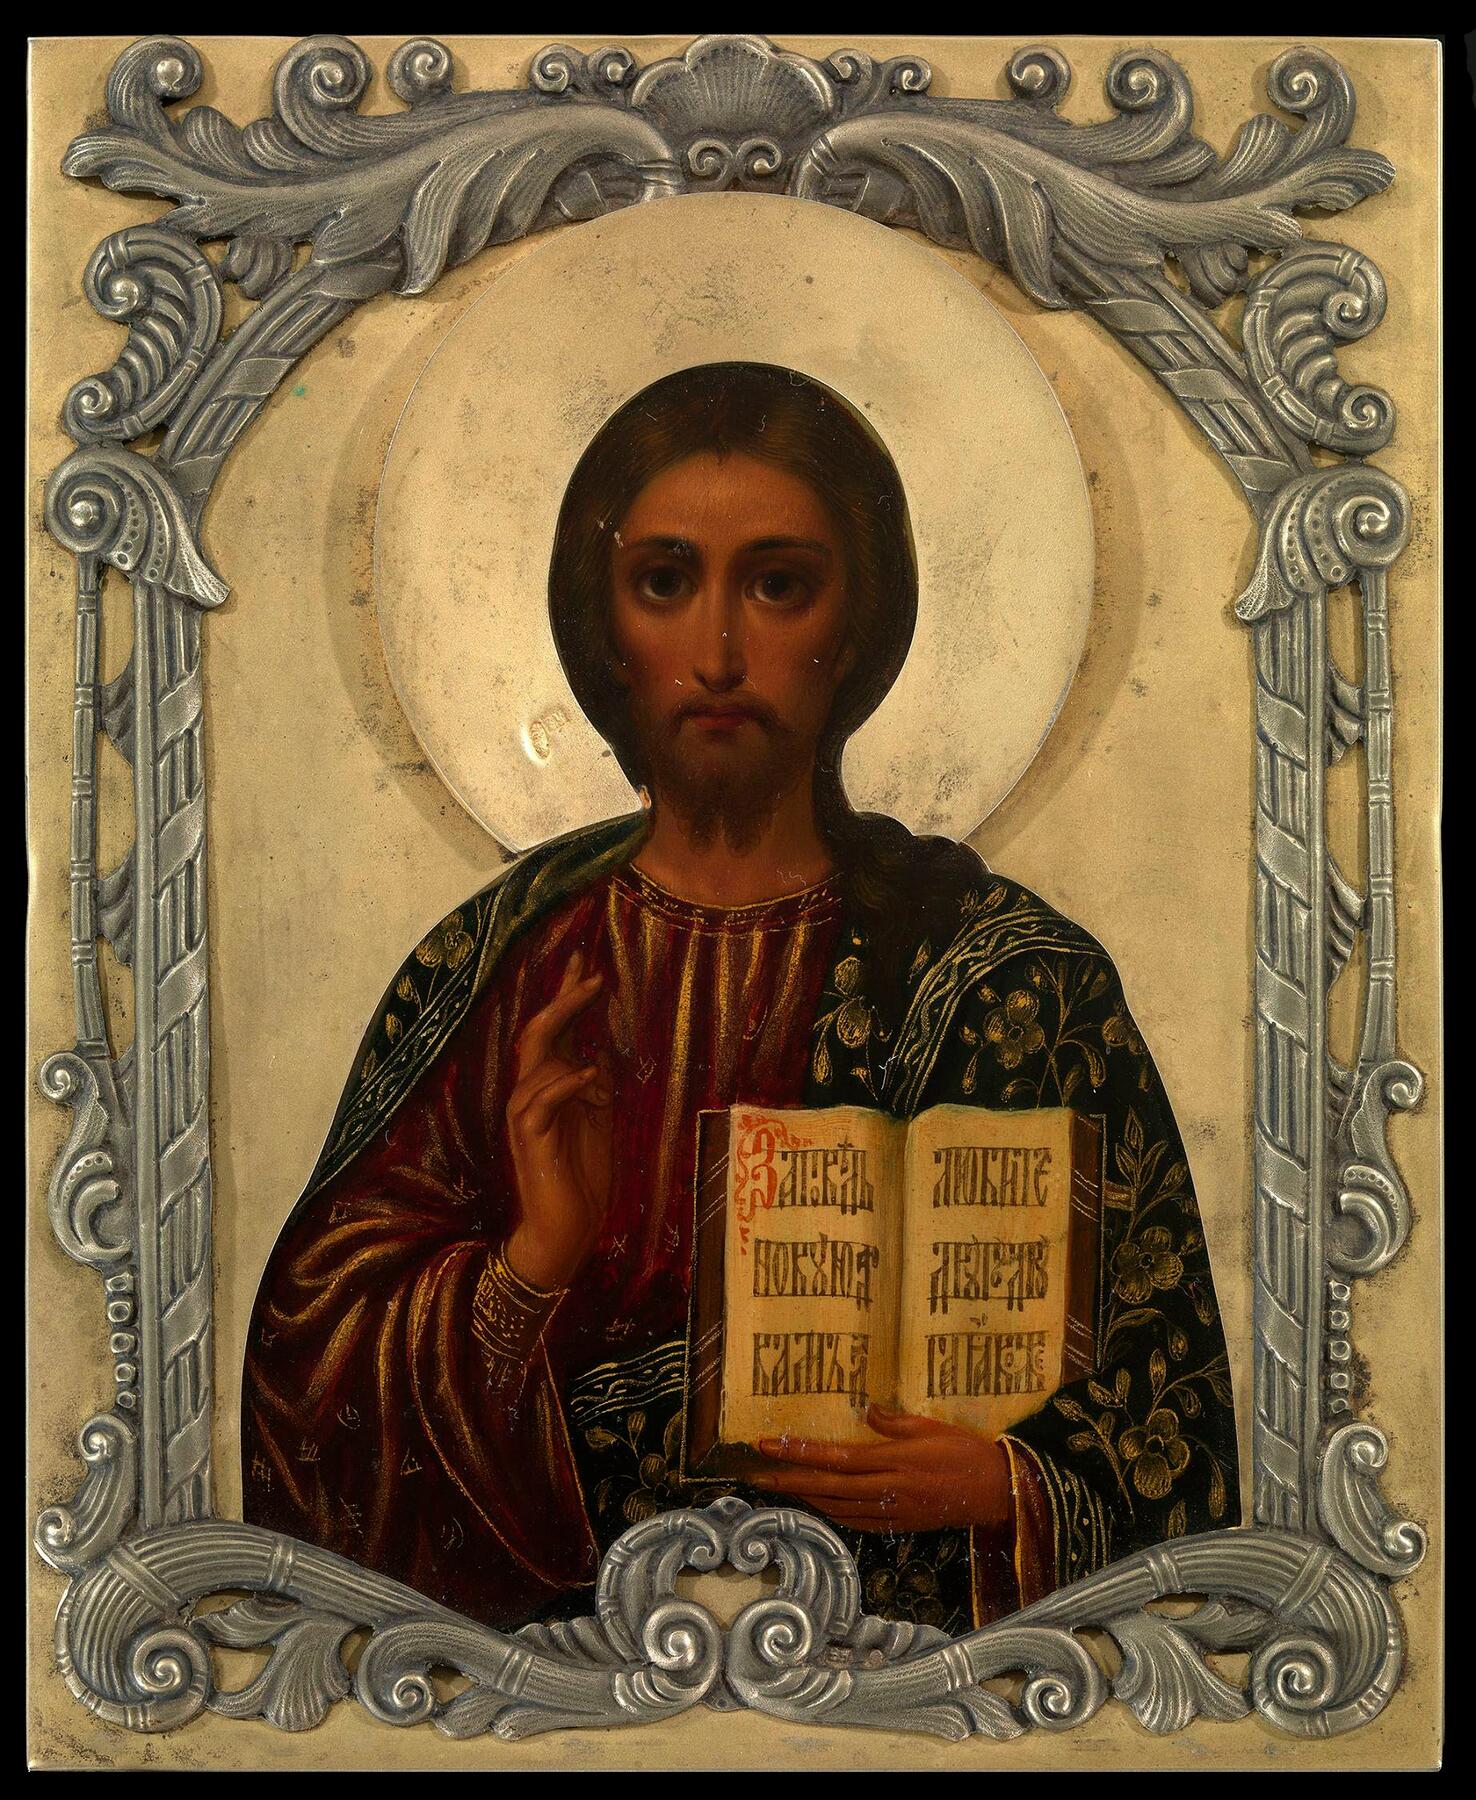 EARLY 20TH CENTURY, OIL ON PANEL, OKLADS STAMPED WITH MAKER’S
MARKS EU IN CYRILLIC, MOSCOW, 84 STANDARD